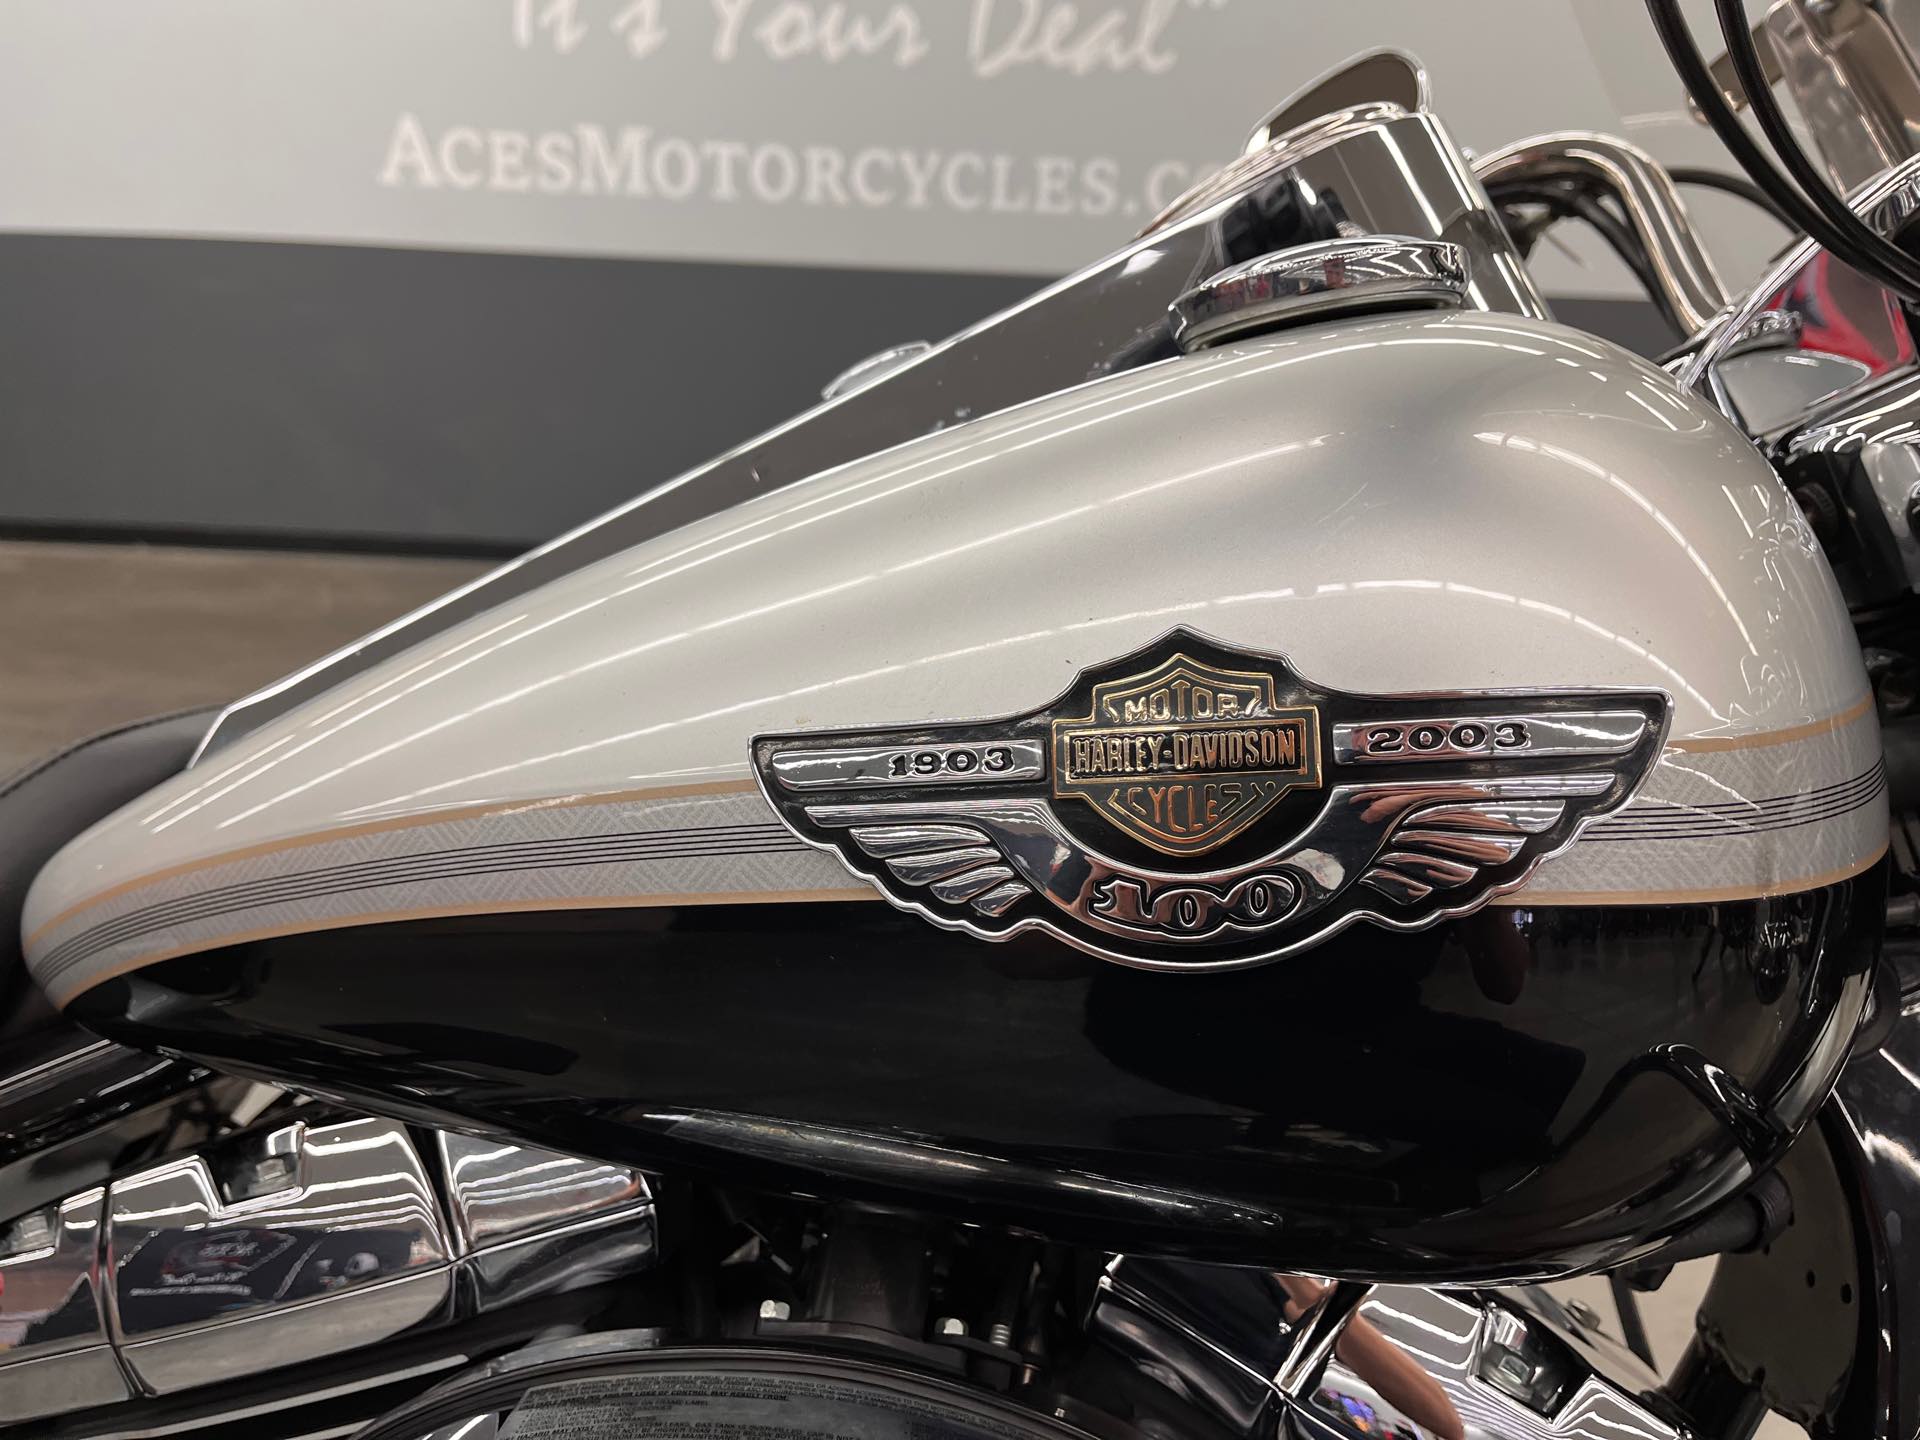 2003 Harley-Davidson FLHRCI ANNIVERSARY at Aces Motorcycles - Denver